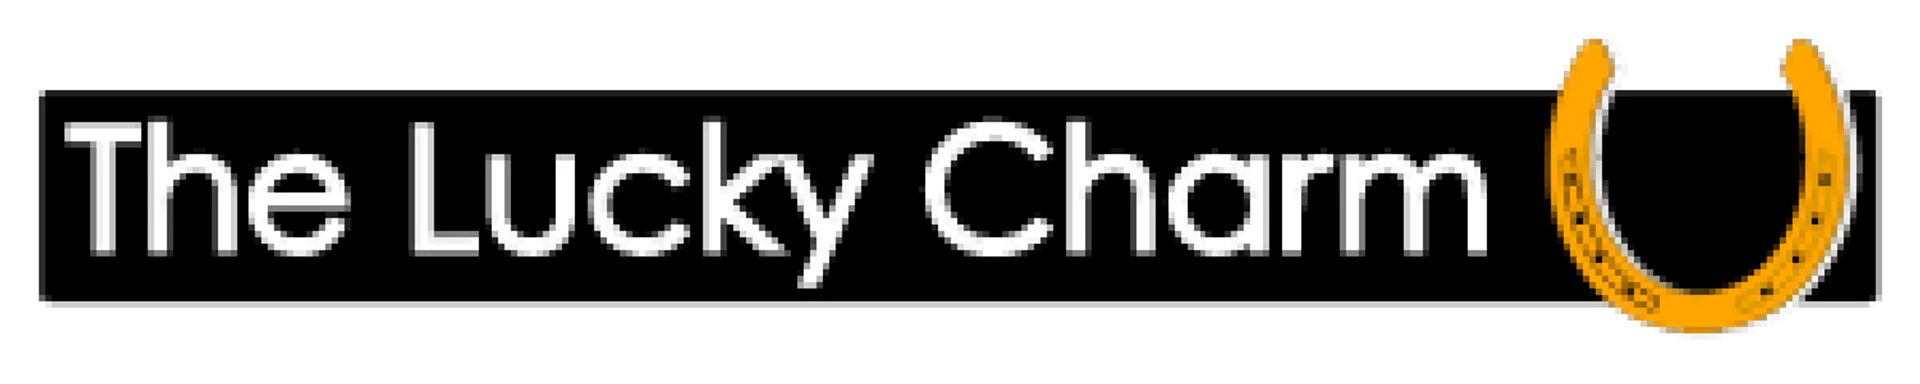 THE LUCKY CHARM logo of current catalogue